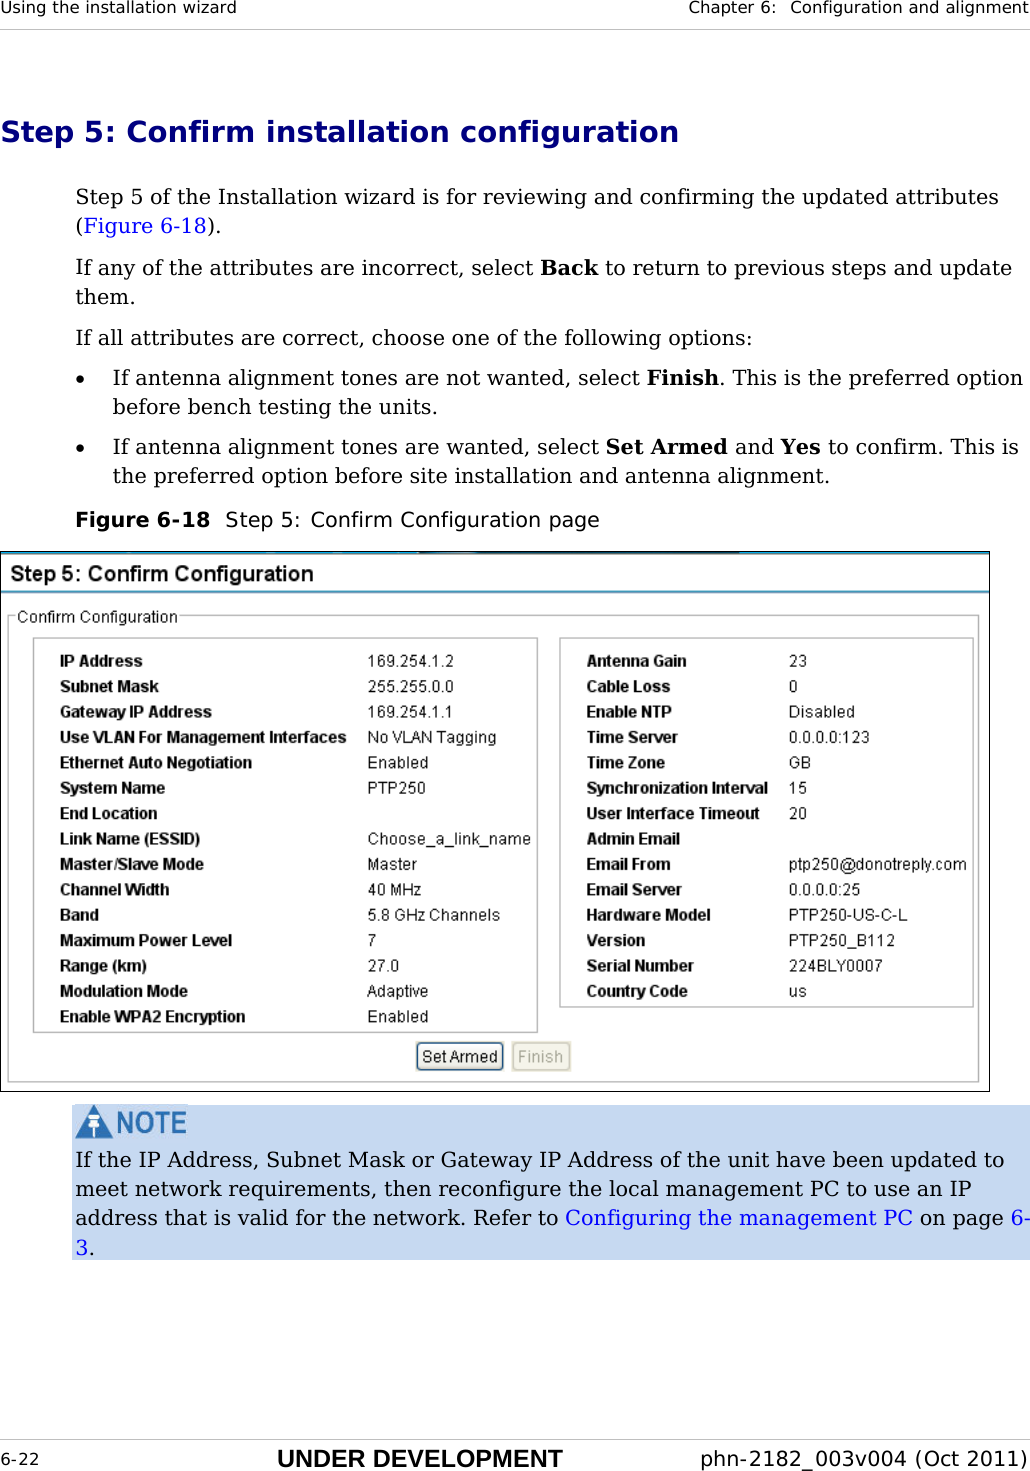 Using the installation wizard  Chapter 6:  Configuration and alignment  6-22 UNDER DEVELOPMENT  phn-2182_003v004 (Oct 2011)  Step 5: Confirm installation configuration Step 5 of the Installation wizard is for reviewing and confirming the updated attributes (Figure 6-18). If any of the attributes are incorrect, select Back to return to previous steps and update them. If all attributes are correct, choose one of the following options: • If antenna alignment tones are not wanted, select Finish. This is the preferred option before bench testing the units. • If antenna alignment tones are wanted, select Set Armed and Yes to confirm. This is the preferred option before site installation and antenna alignment. Figure 6-18  Step 5: Confirm Configuration page   If the IP Address, Subnet Mask or Gateway IP Address of the unit have been updated to meet network requirements, then reconfigure the local management PC to use an IP address that is valid for the network. Refer to Configuring the management PC on page 6-3. 